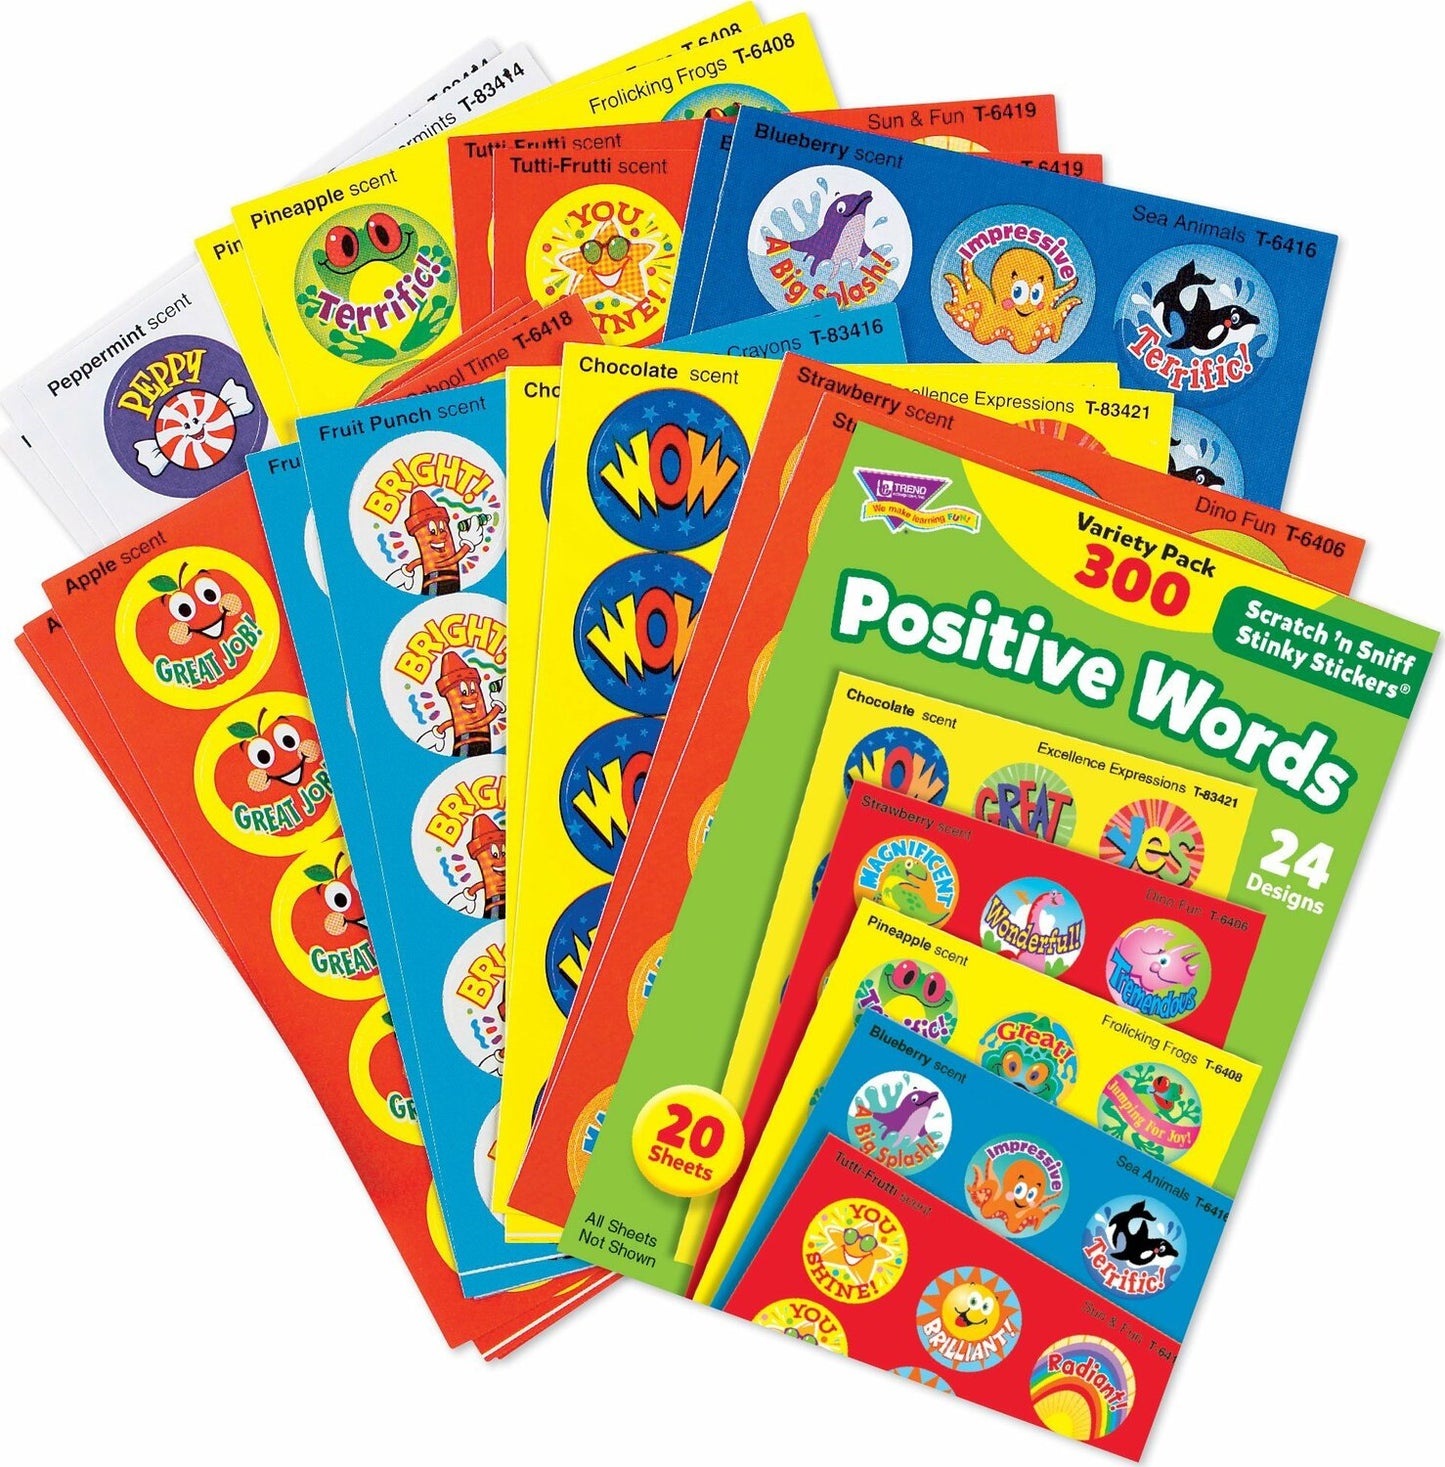 Positive Words Stinky Stickers Variety Pack, 300 Ct